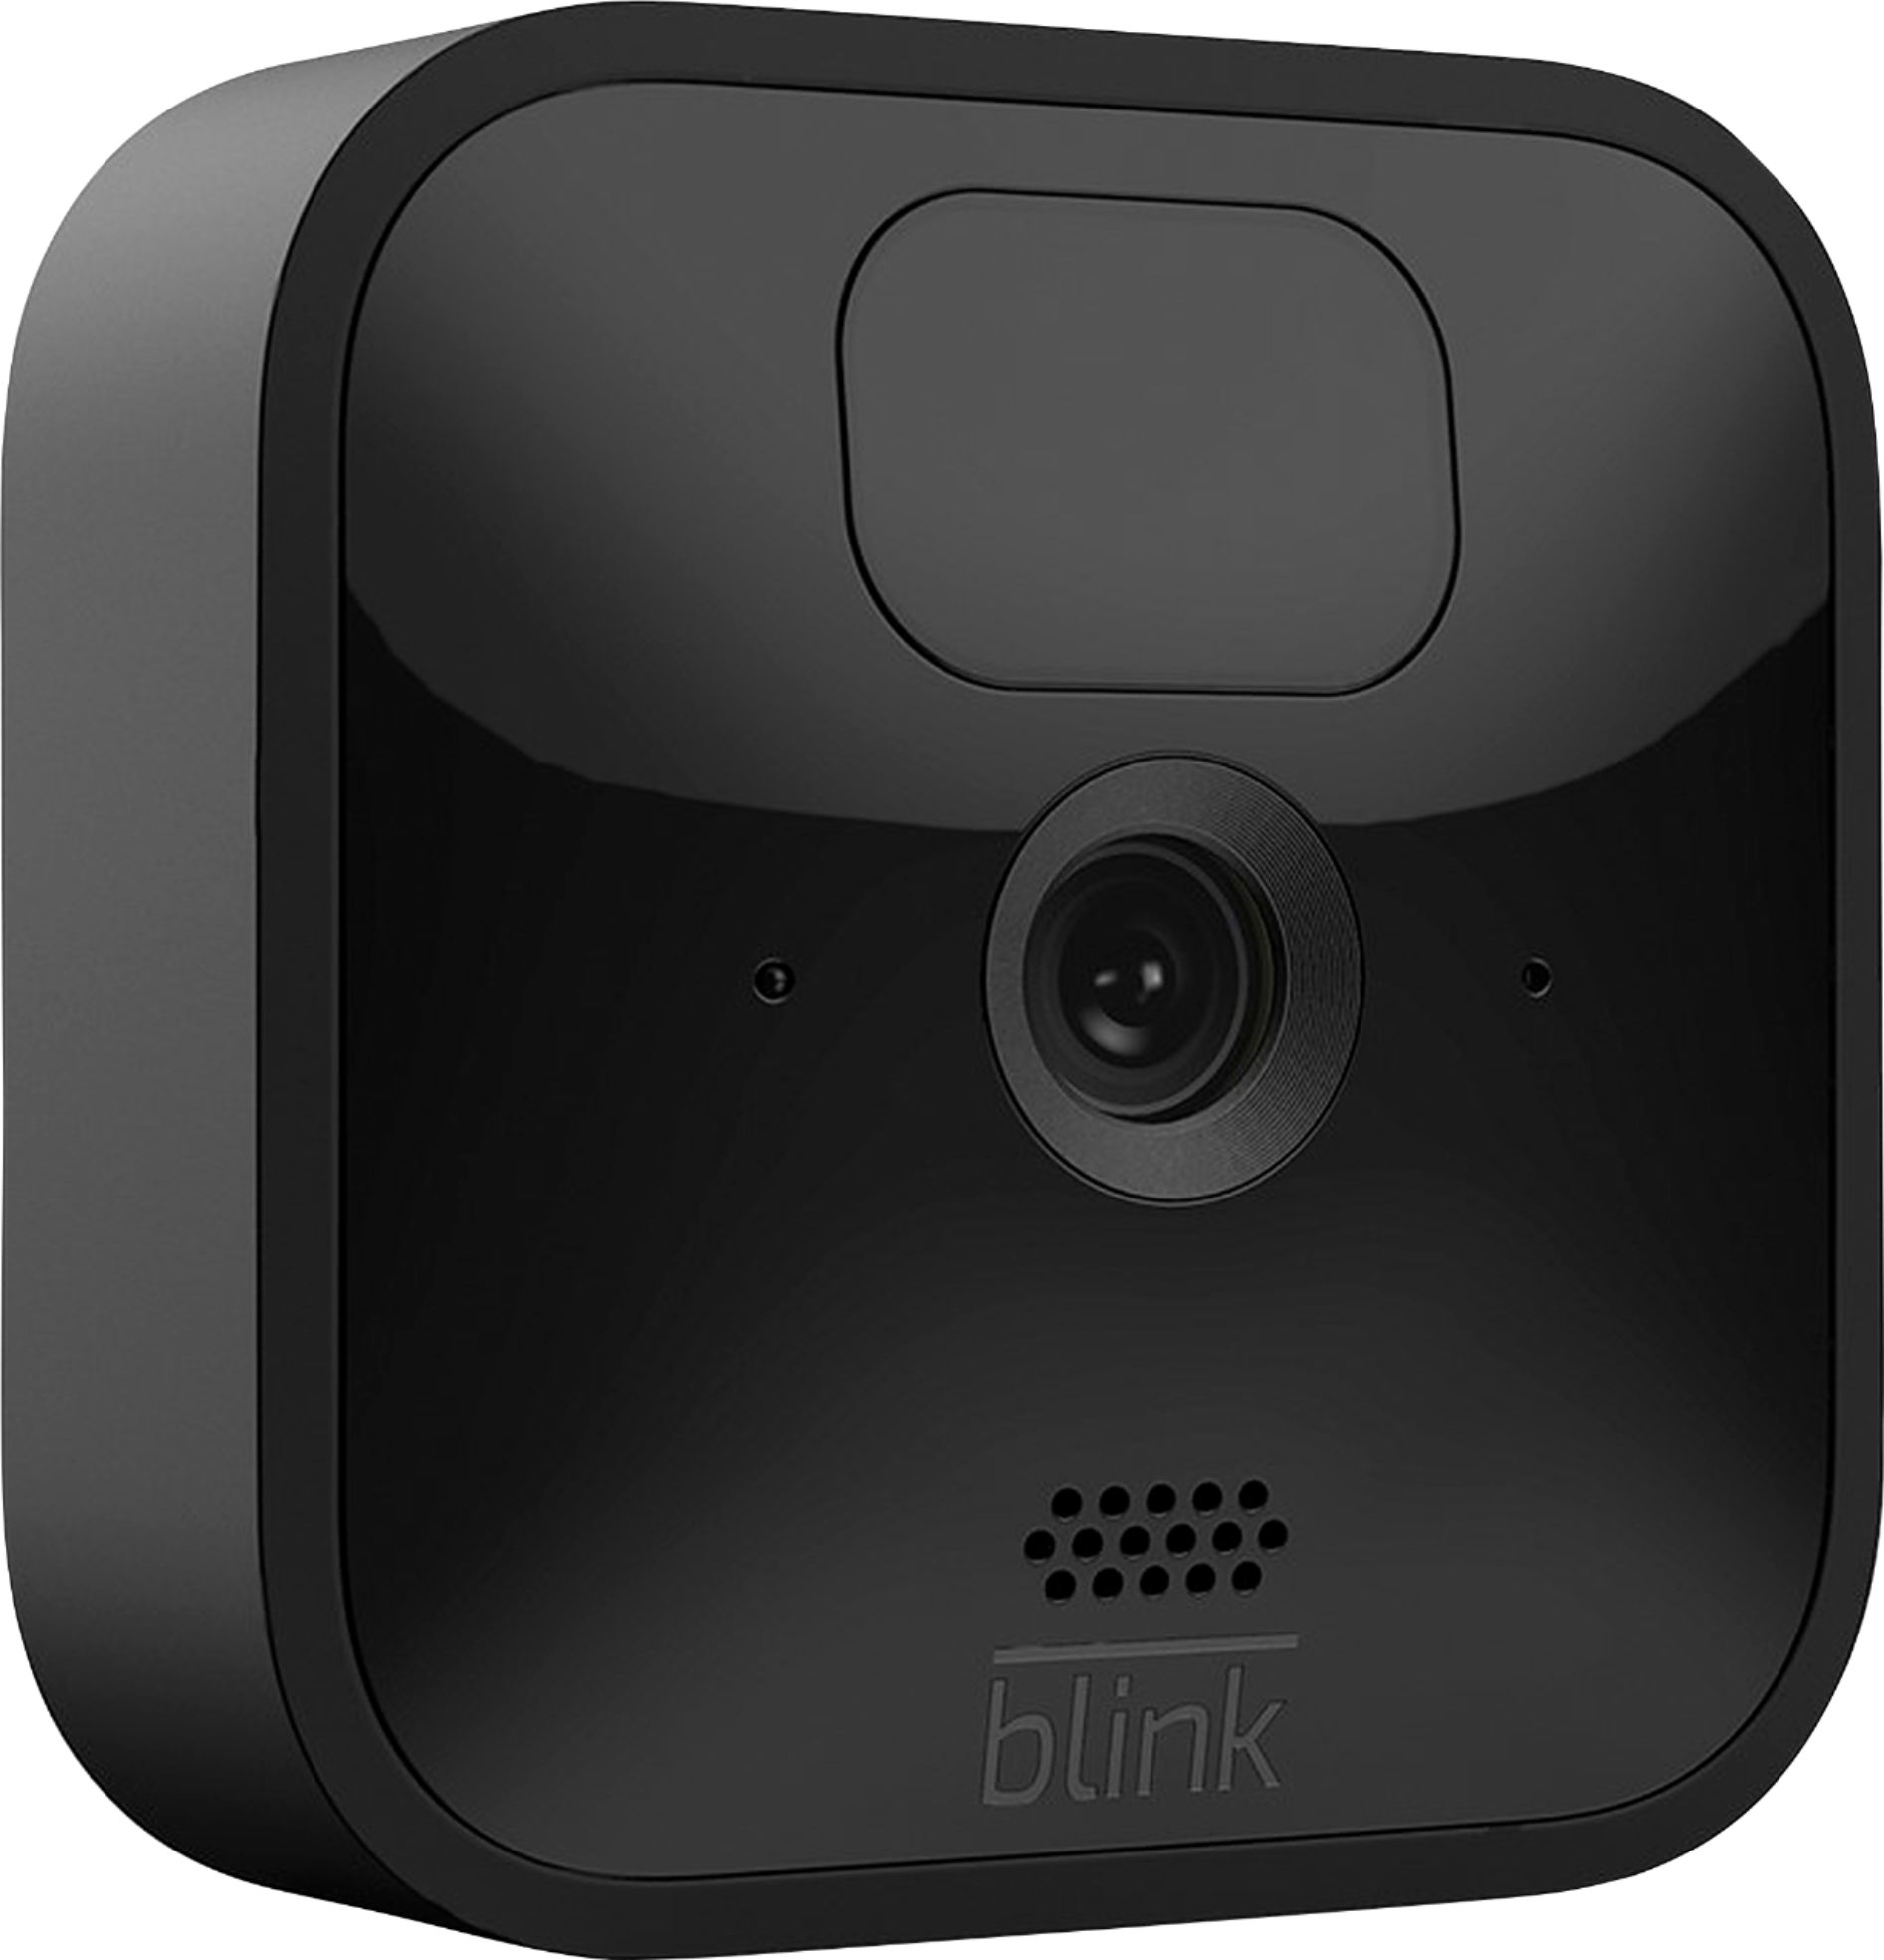 Blink Local Storage - What You Need to Know